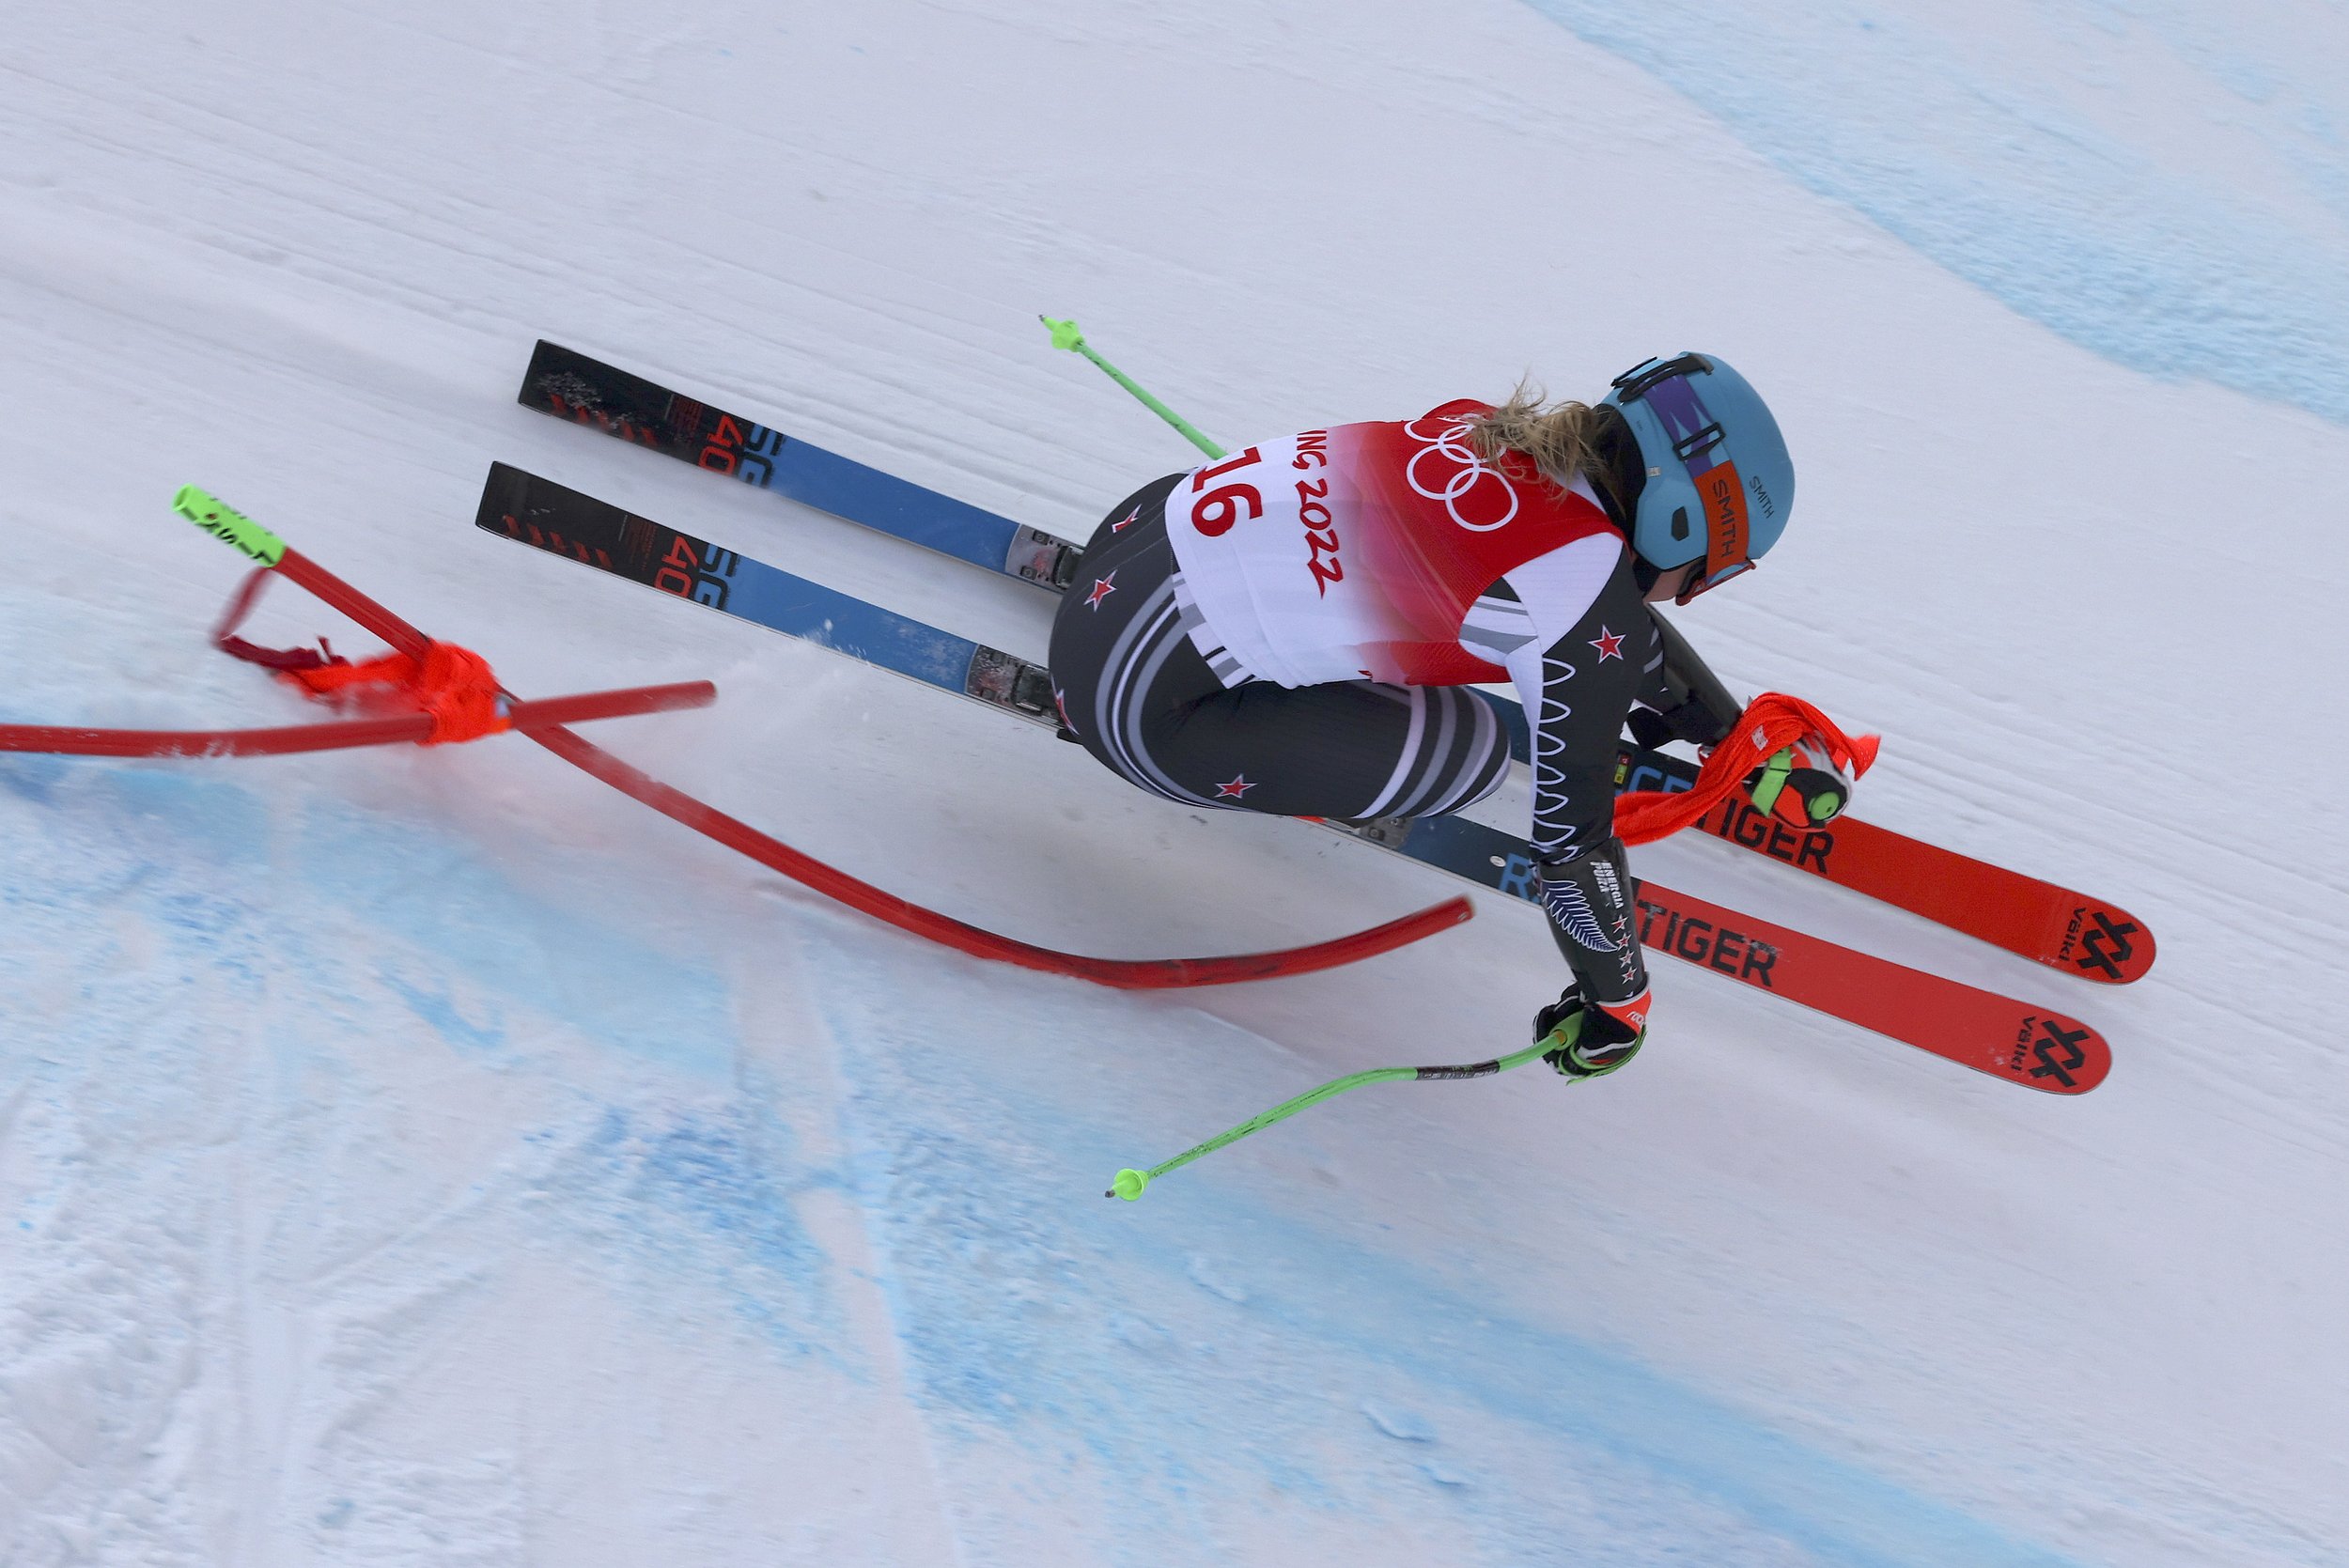  Alice Robinson, of New Zealand crashes into a flag during the women's super-G at the 2022 Winter Olympics, Friday, Feb. 11, 2022, in the Yanqing district of Beijing. (AP Photo/Alessandro Trovati) 